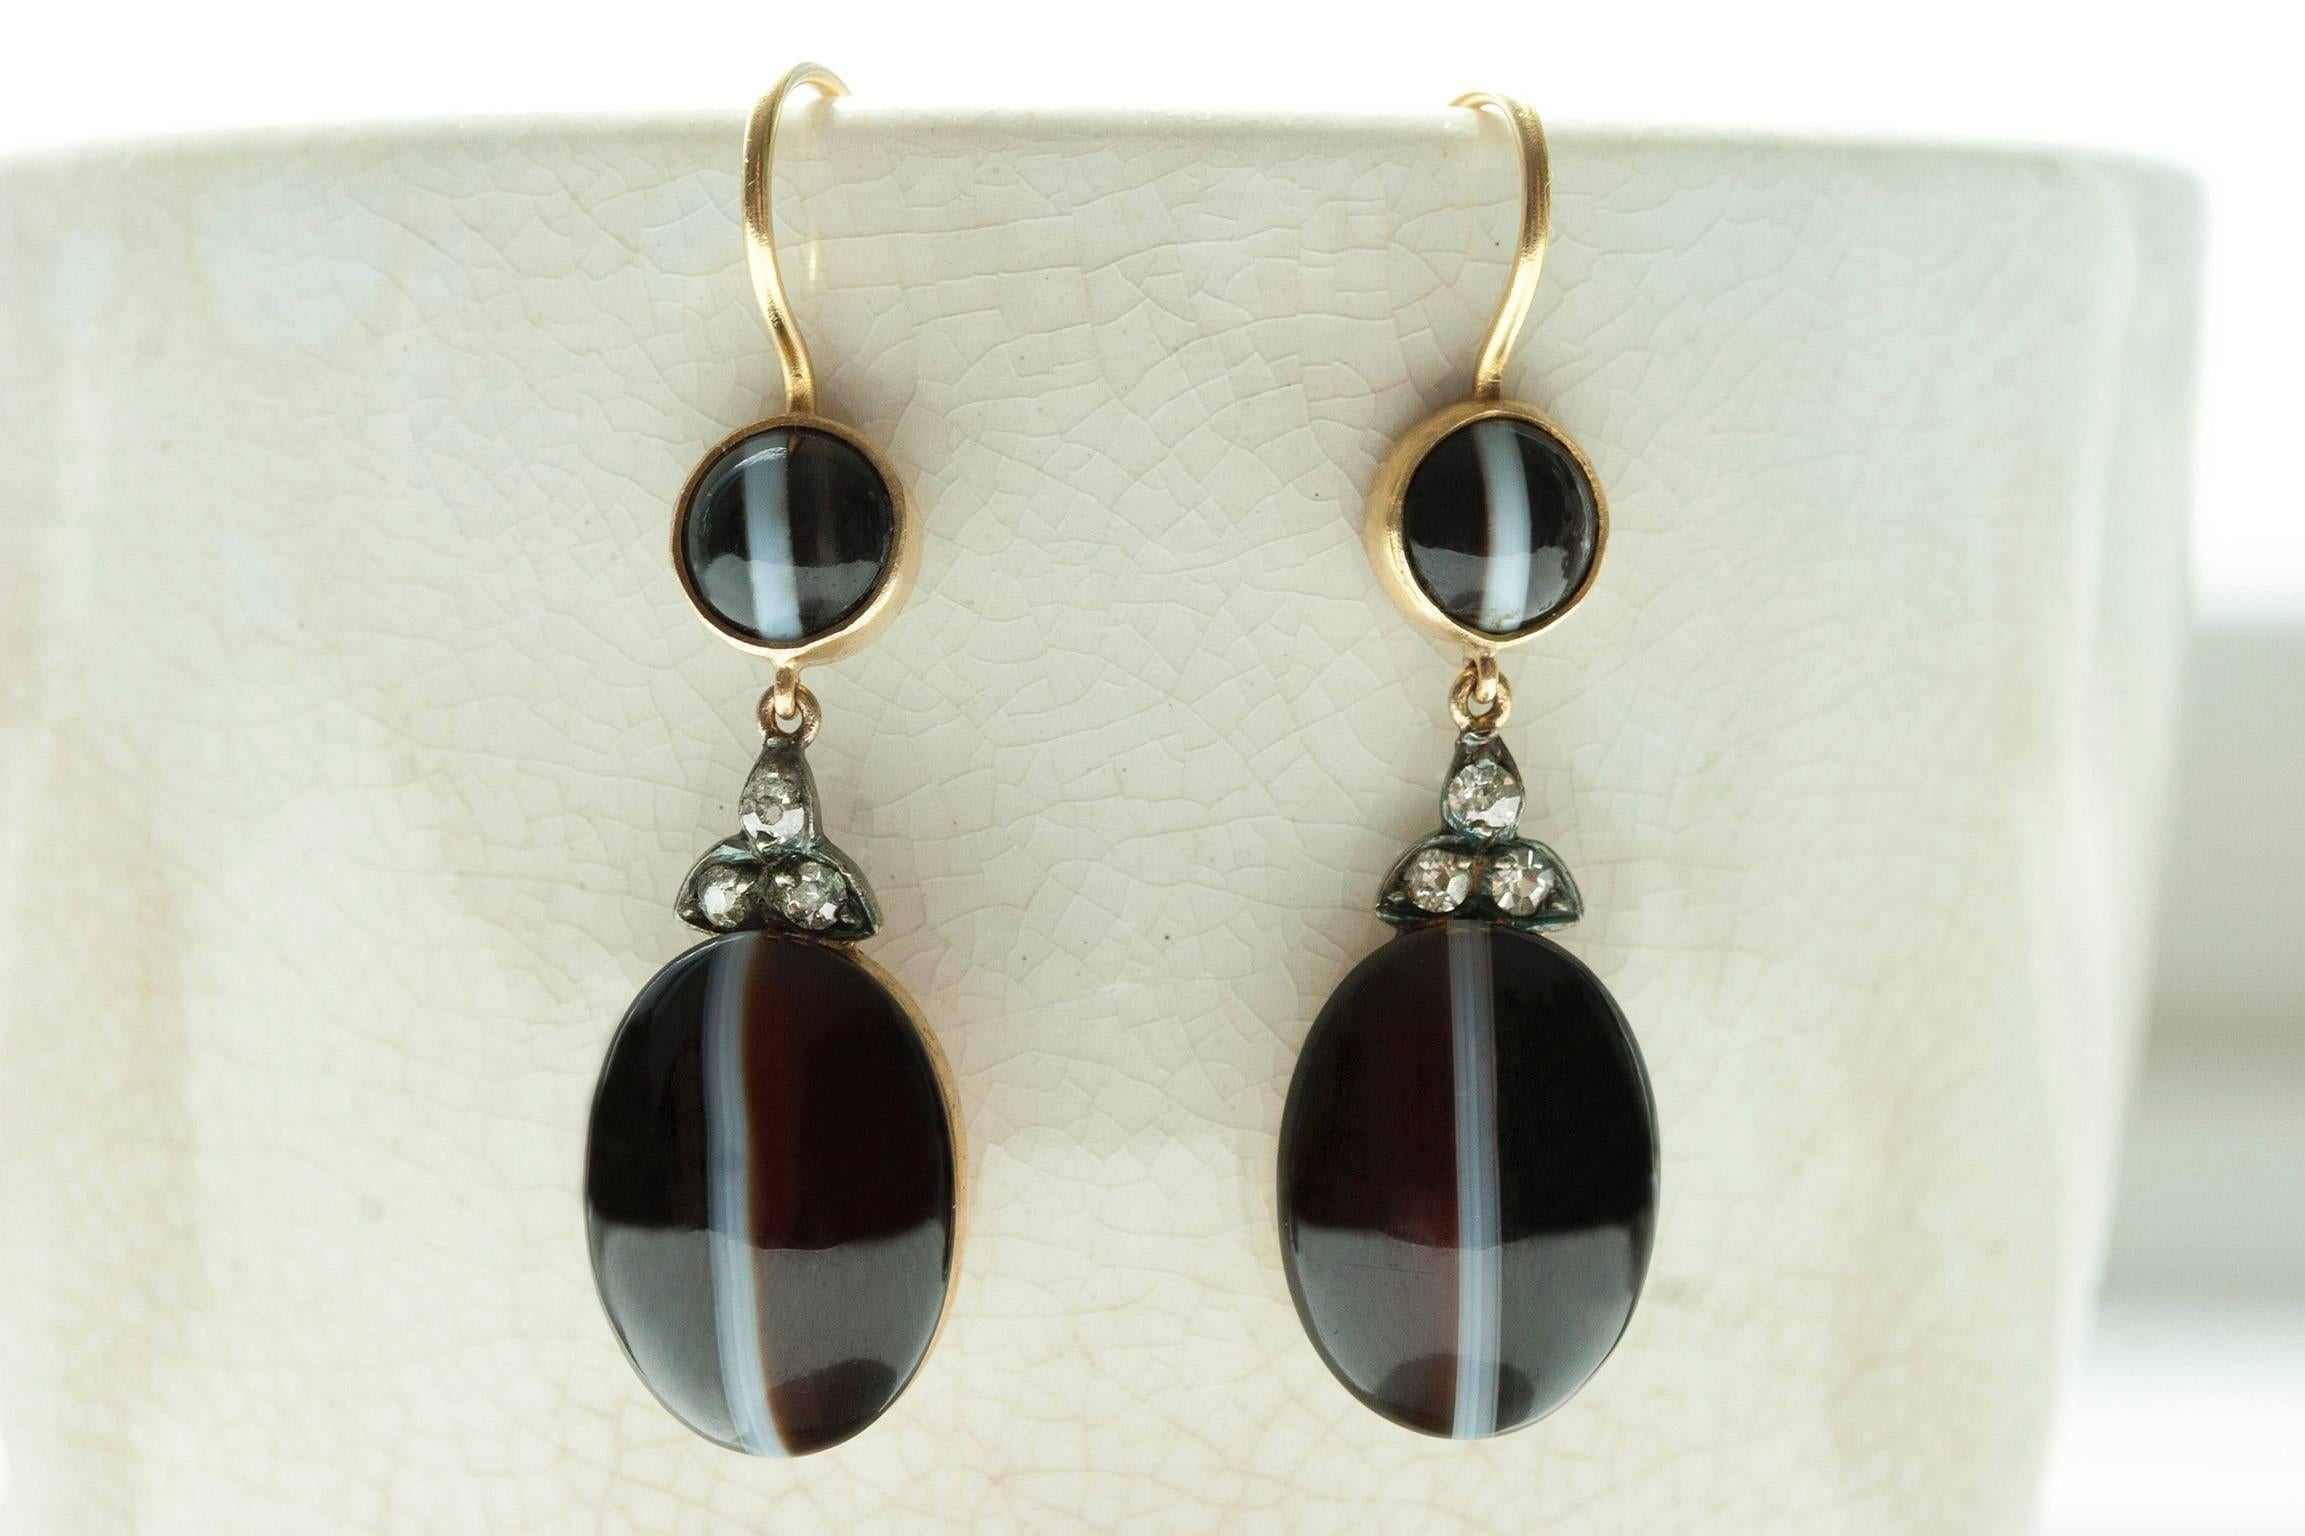 C.1860. Victorian Banded Agate and Diamond Drop Earrings. The pattern of the banded agate cabochons (dark brown/black & white) correspond beautifully. The old-cut diamond connectors in between the cabochons are set in silver on the top, and the